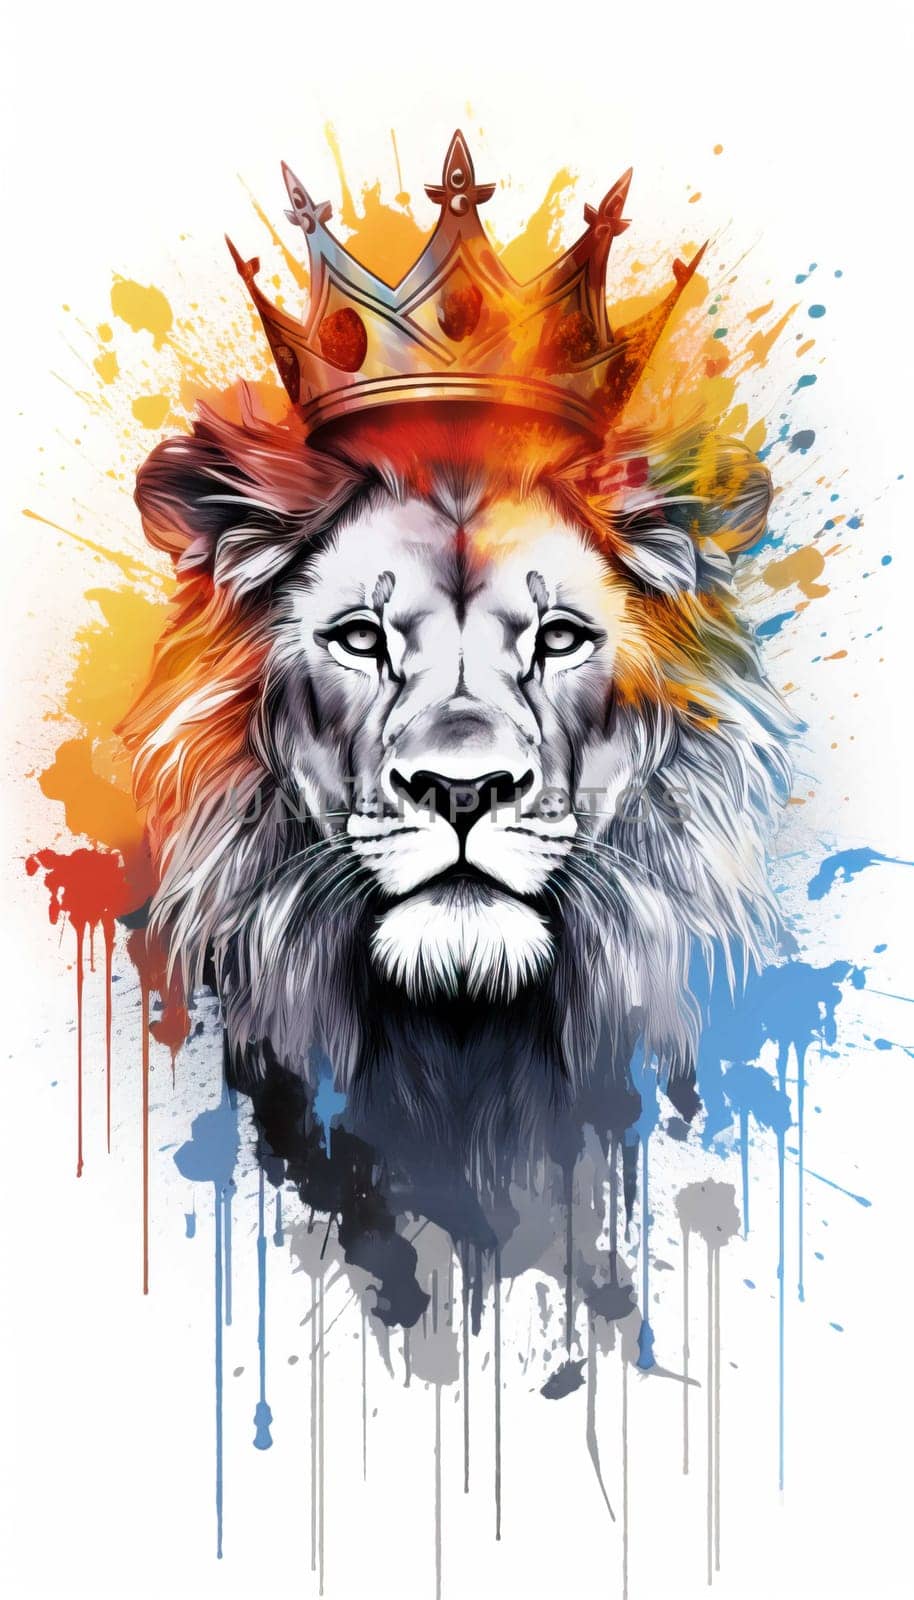 illlustration lion king face , with crown gold , rainbow splash smoke  Generate AI by Mrsongrphc